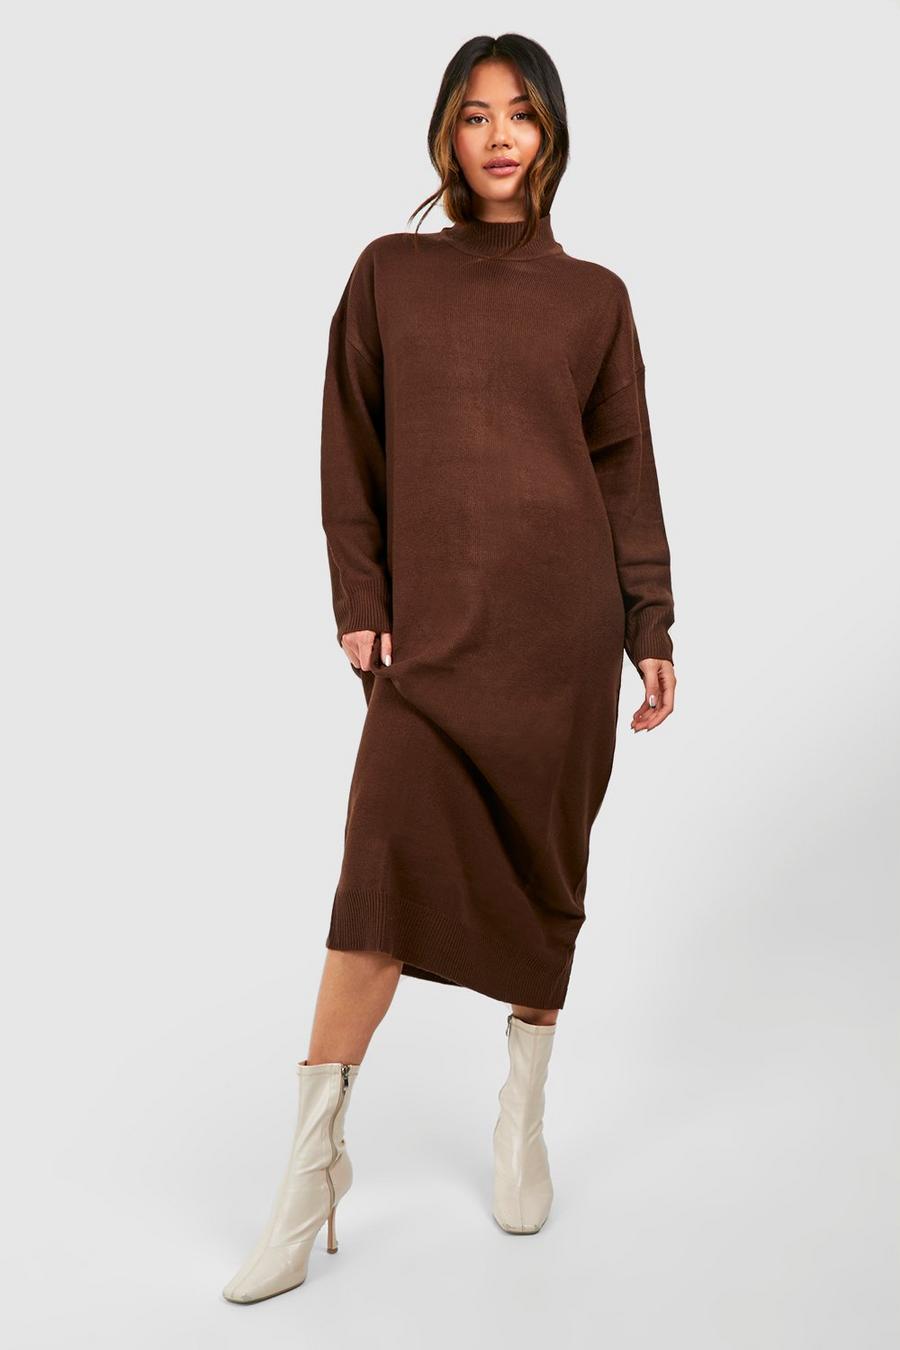 Chocolate brown High Neck Knitted Midaxi Dress